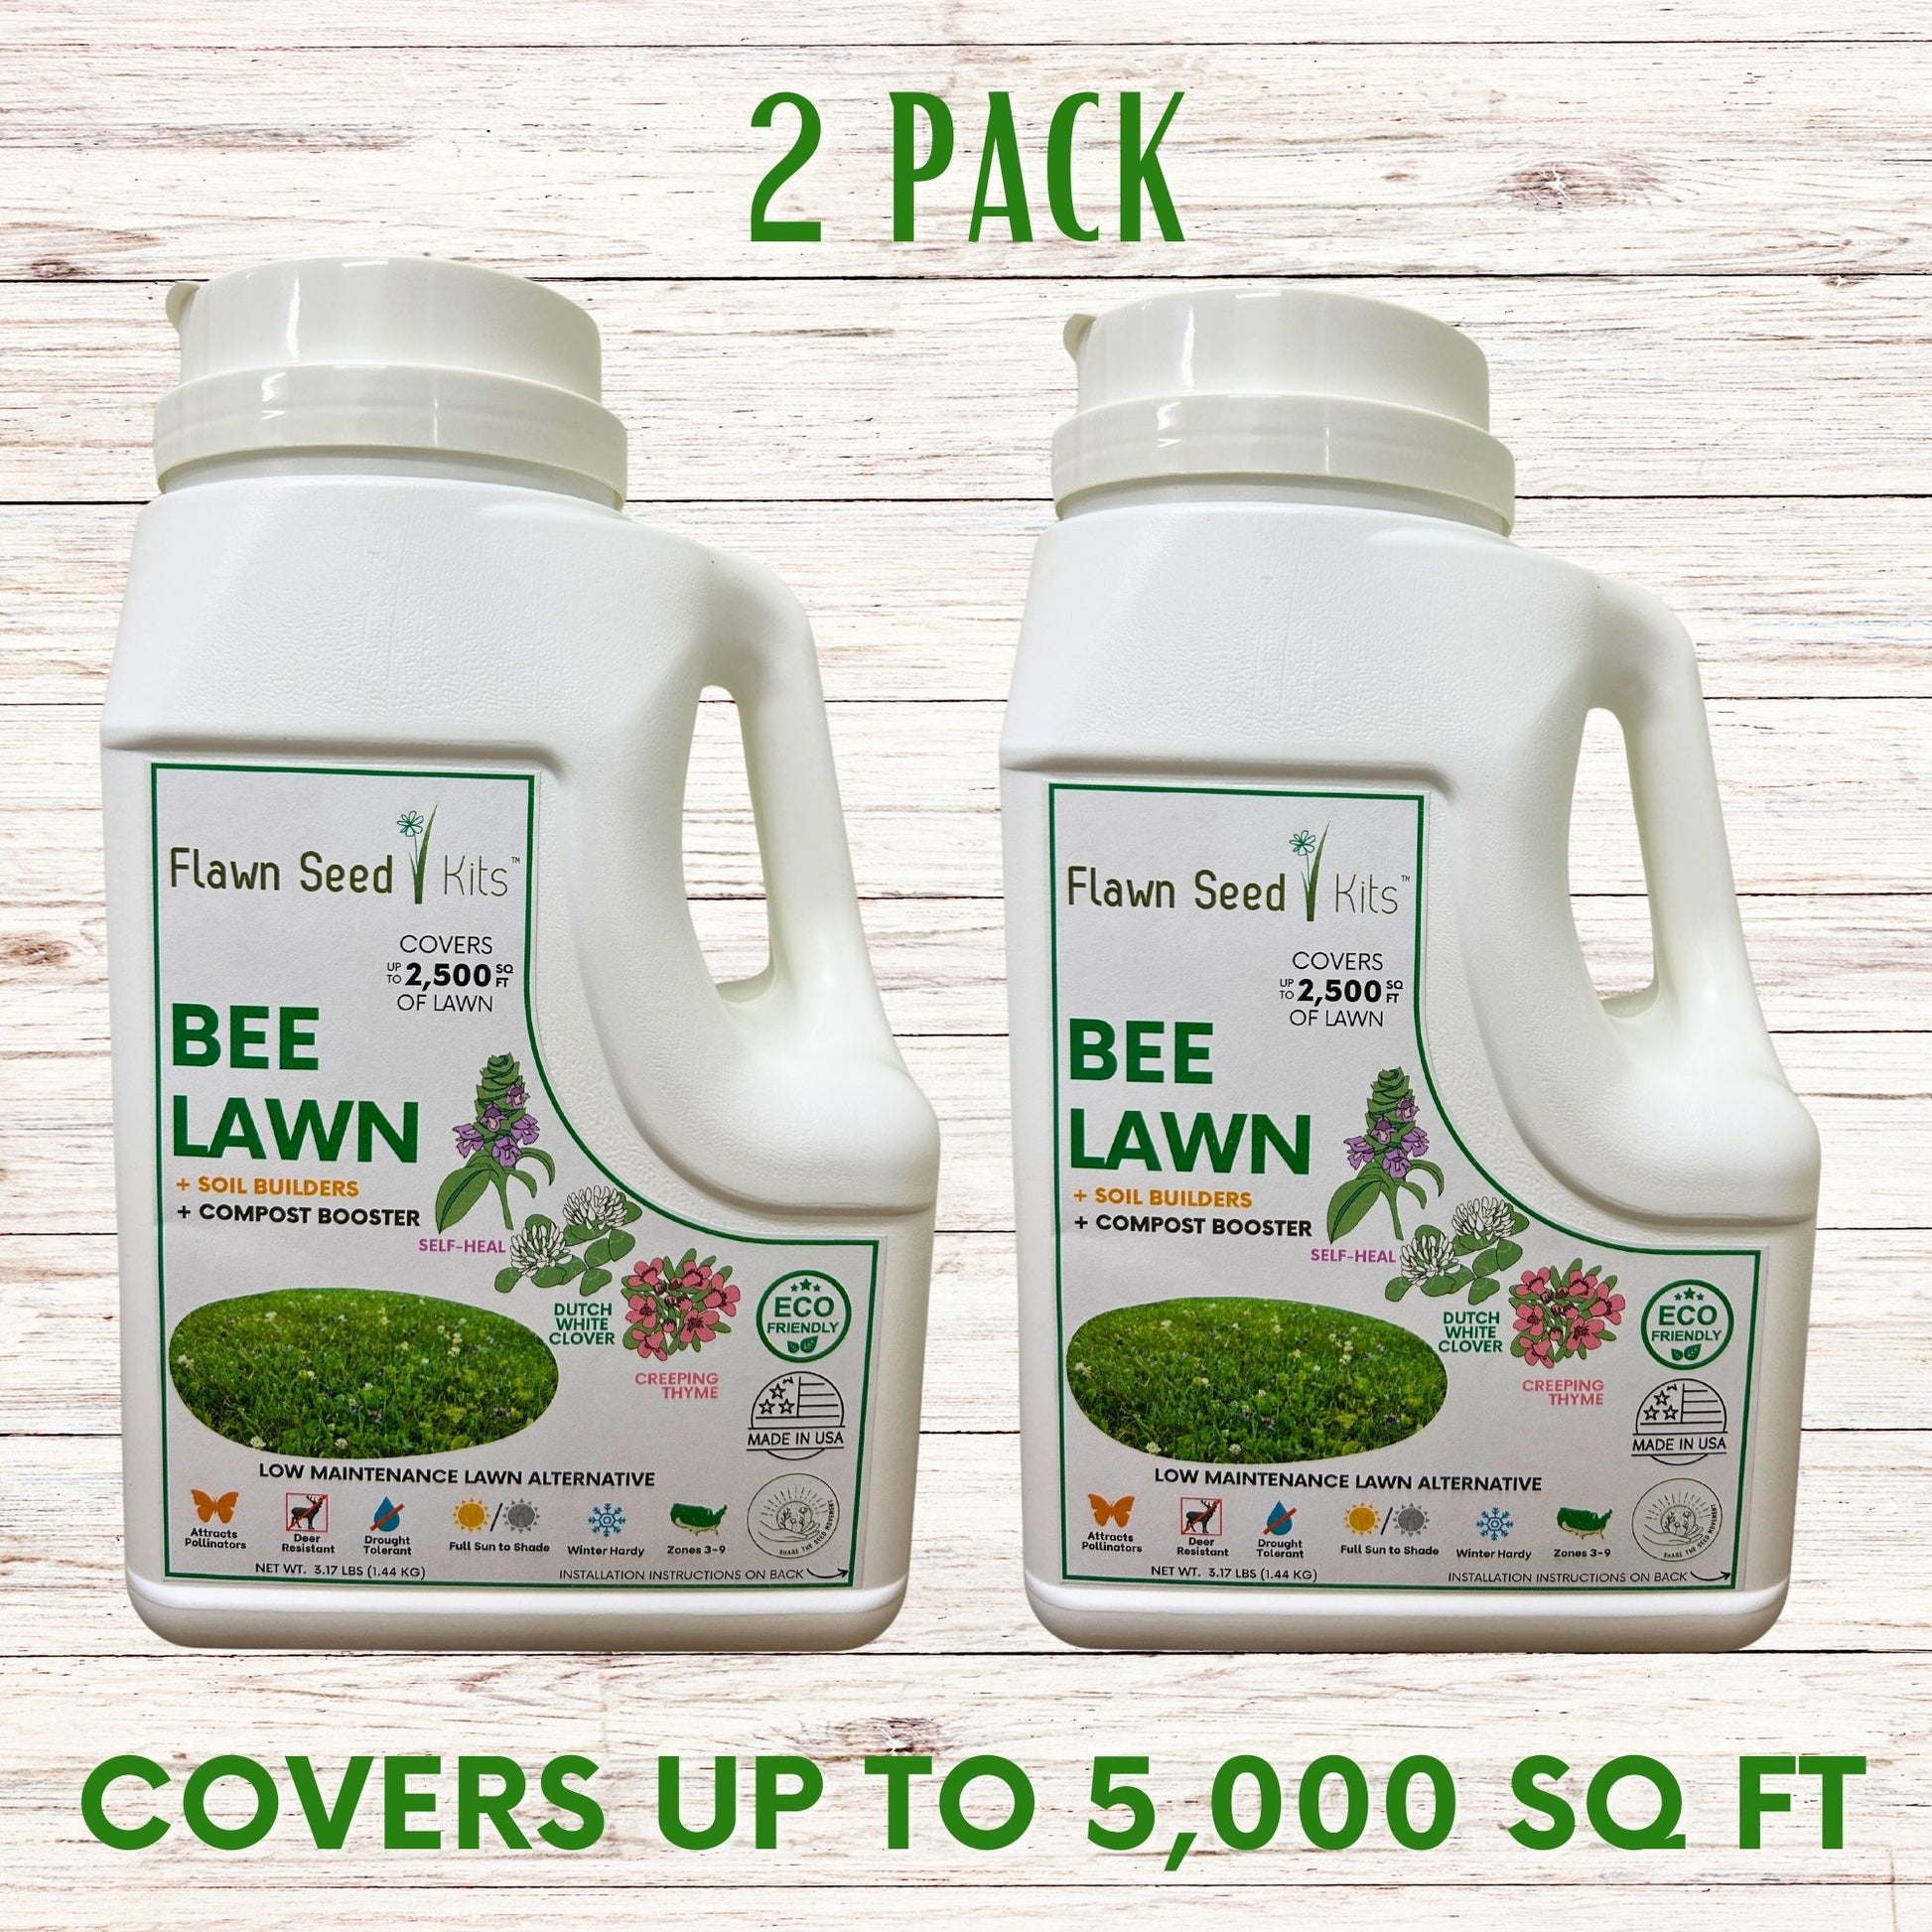 Bee Lawn Flowering Pollinator Seed Kit, Dutch White Clover, Self-Heal, Creeping Thyme, Easy Spread Container 2 Pack Covers 5,000 square feet